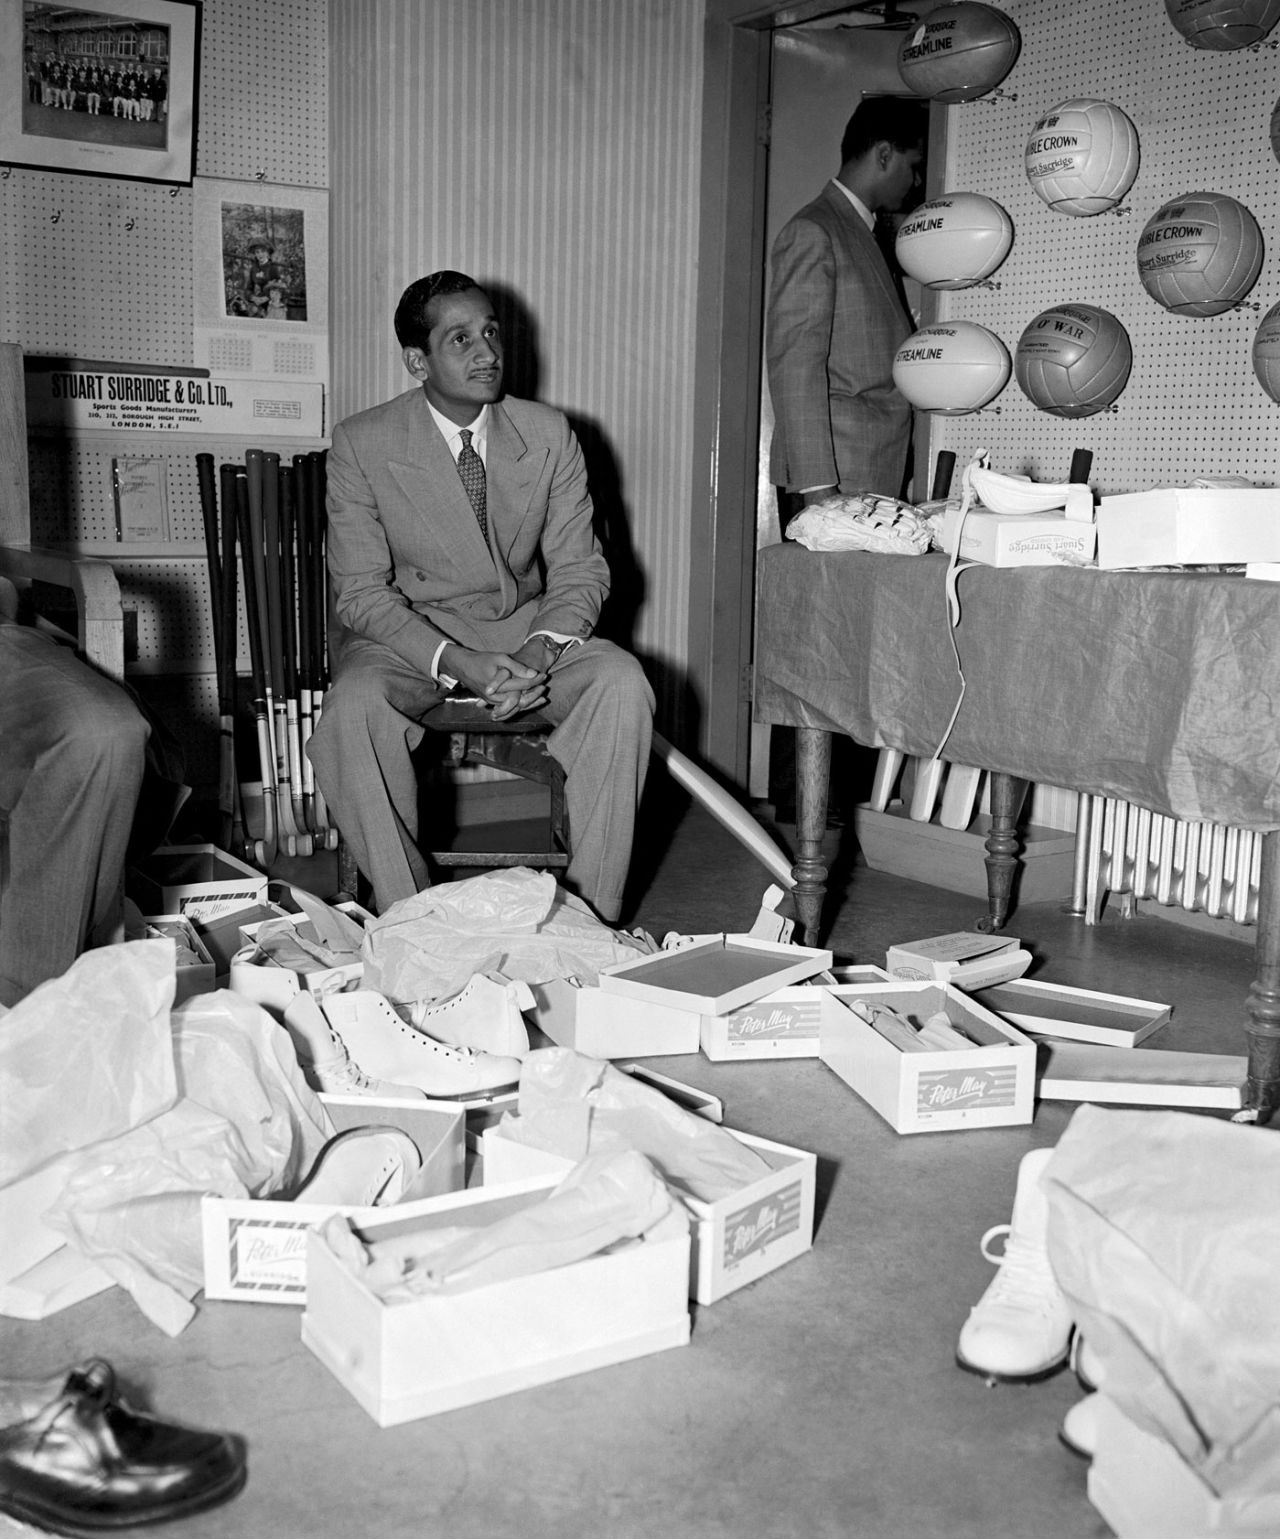 Datta Gaekwad shops for shoes in London, April 20, 1959